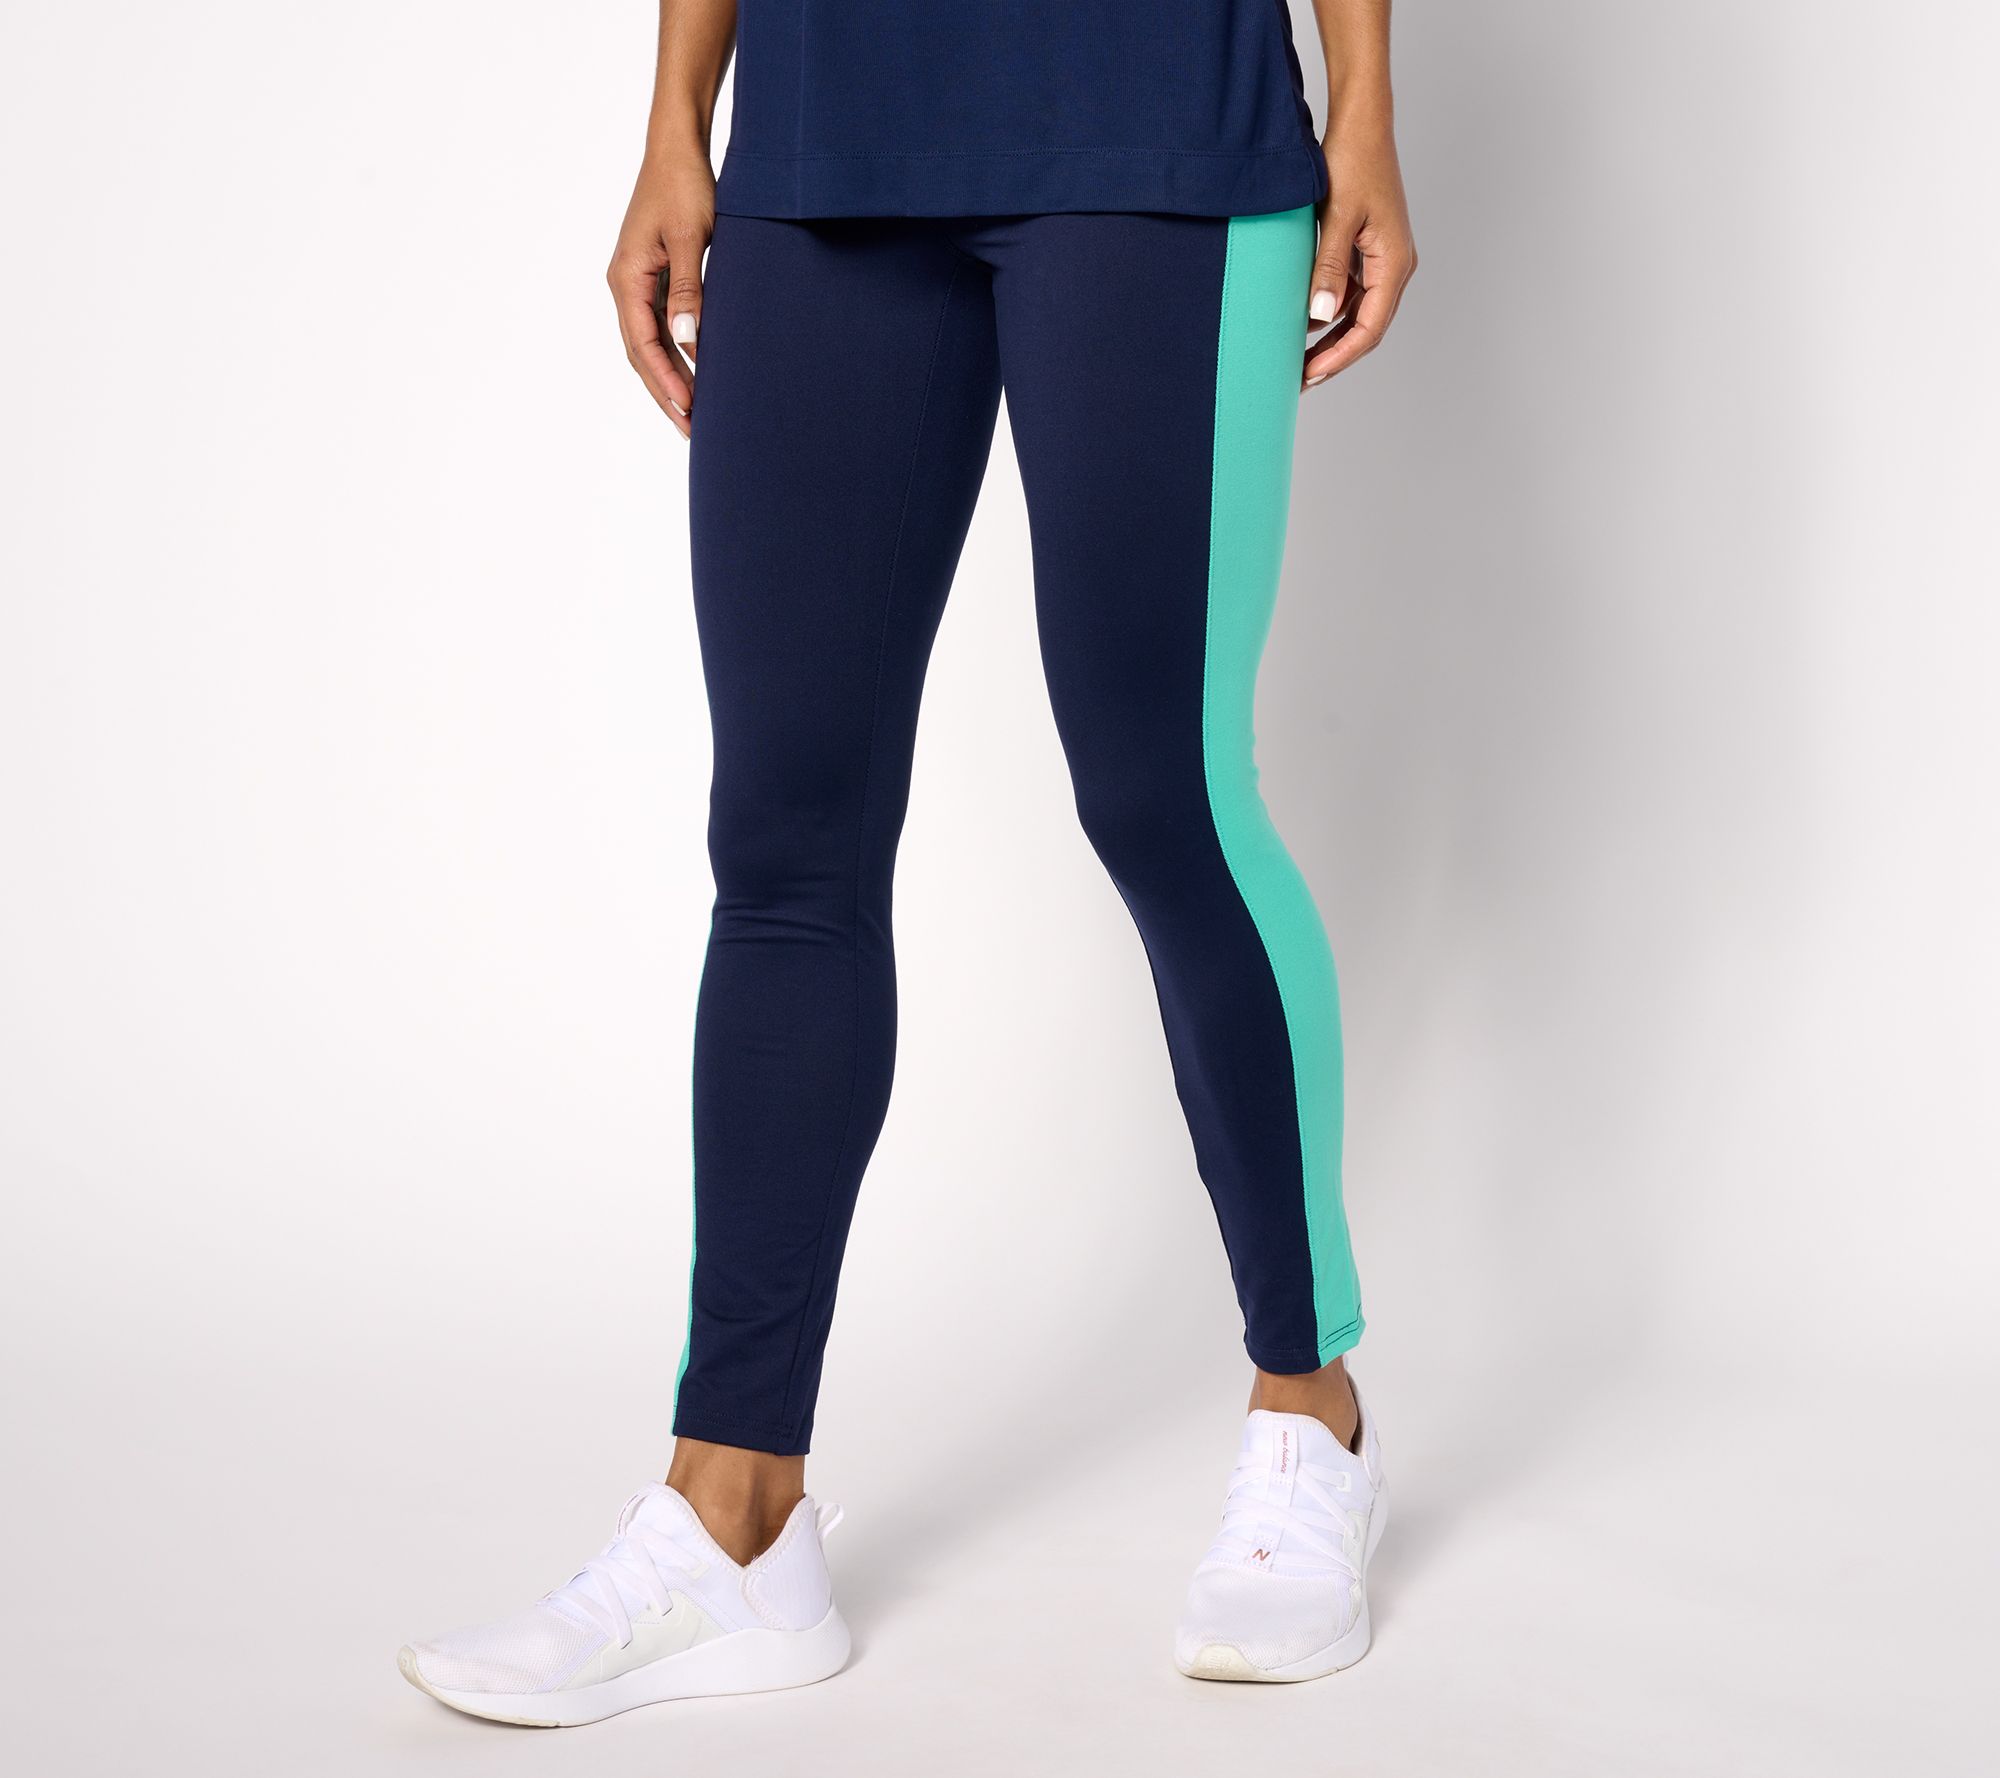 Tolani Collection Printed Leggings with Side Pockets